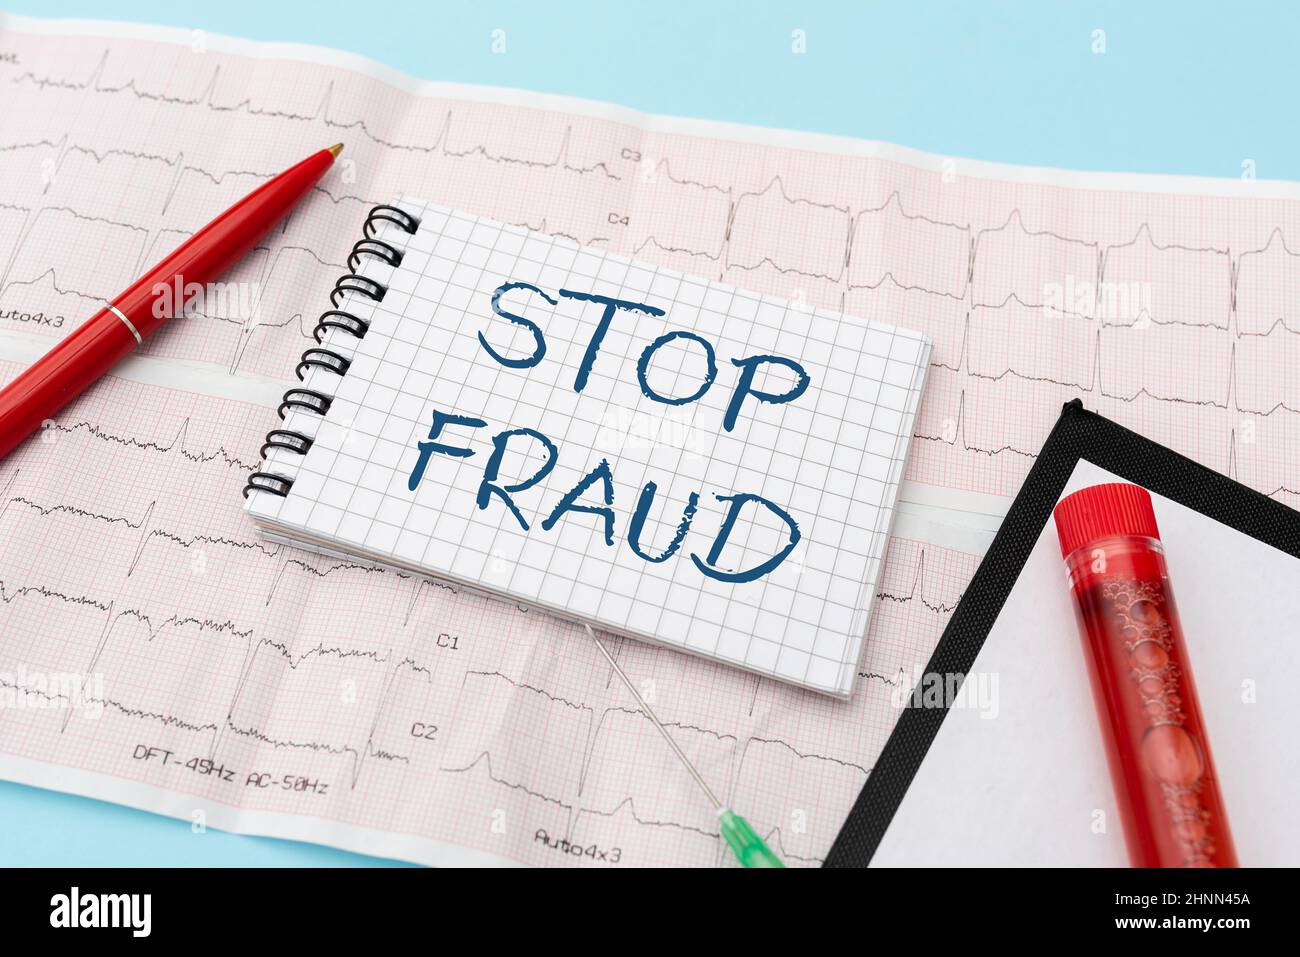 Conceptual display Stop Fraud. Business showcase campaign advices showing to watch out thier money transactions Reading Graph And Writing Important Medical Notes Test Result Analysis Stock Photo